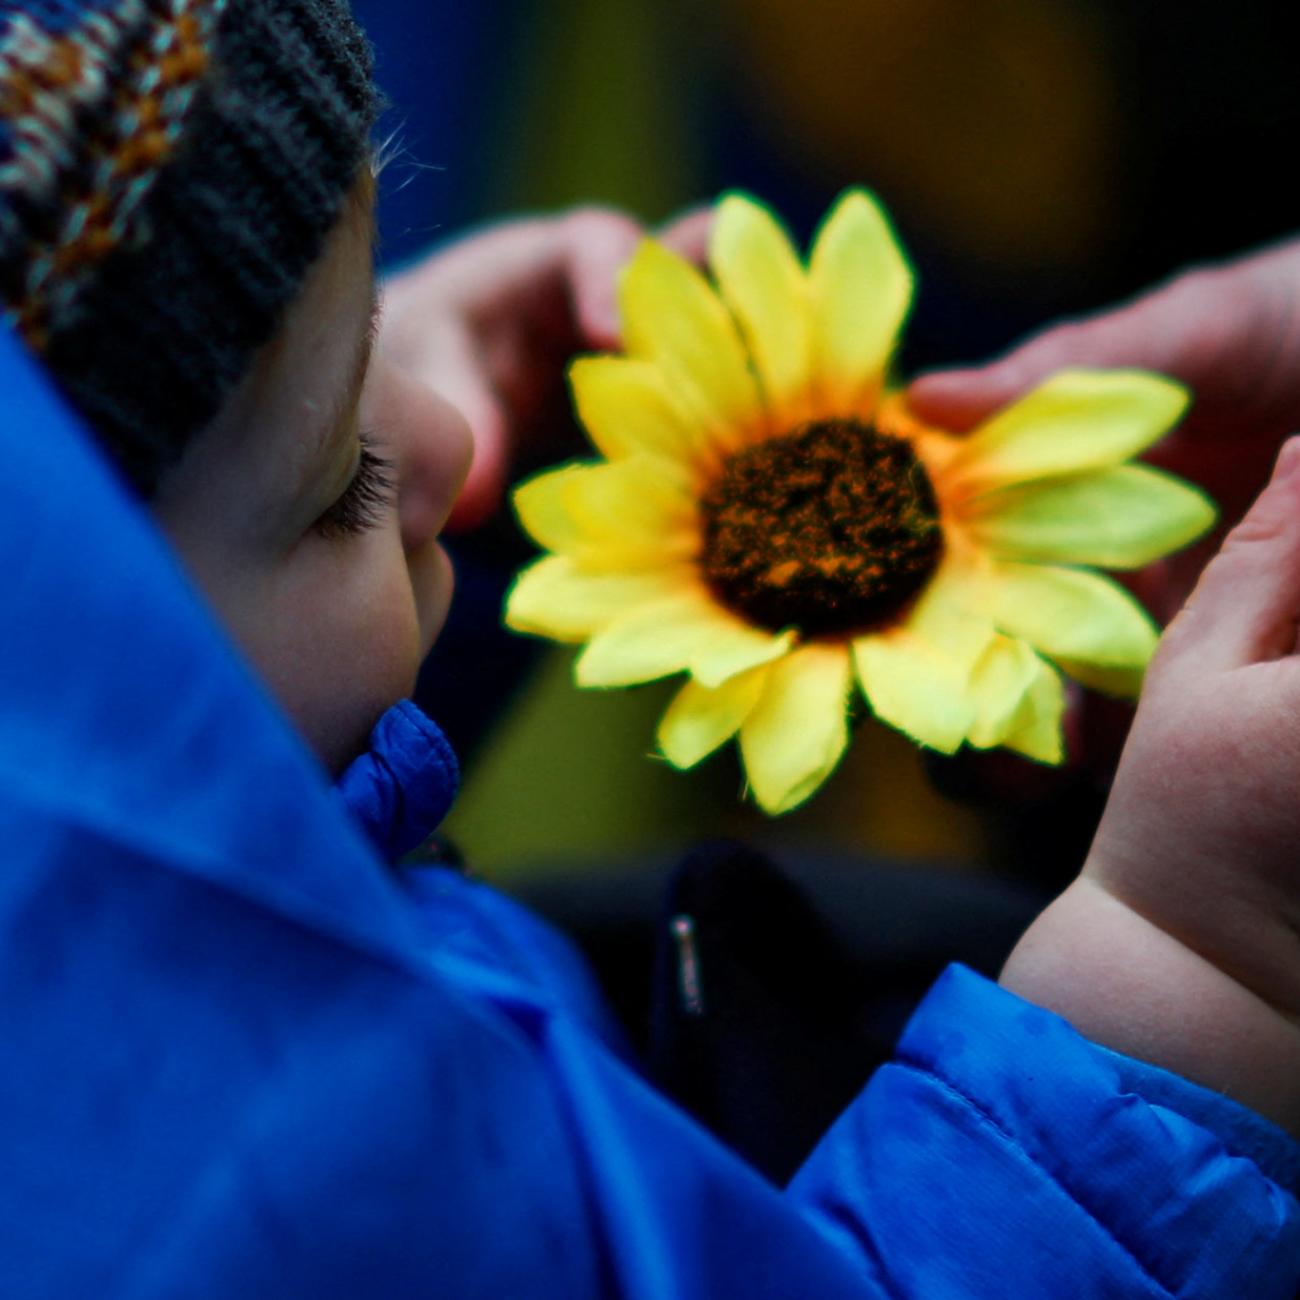 A baby in a blue coat plays with an artificial yellow sunflower. The colors evoke the blue and yellow of the Ukrainian flag. 